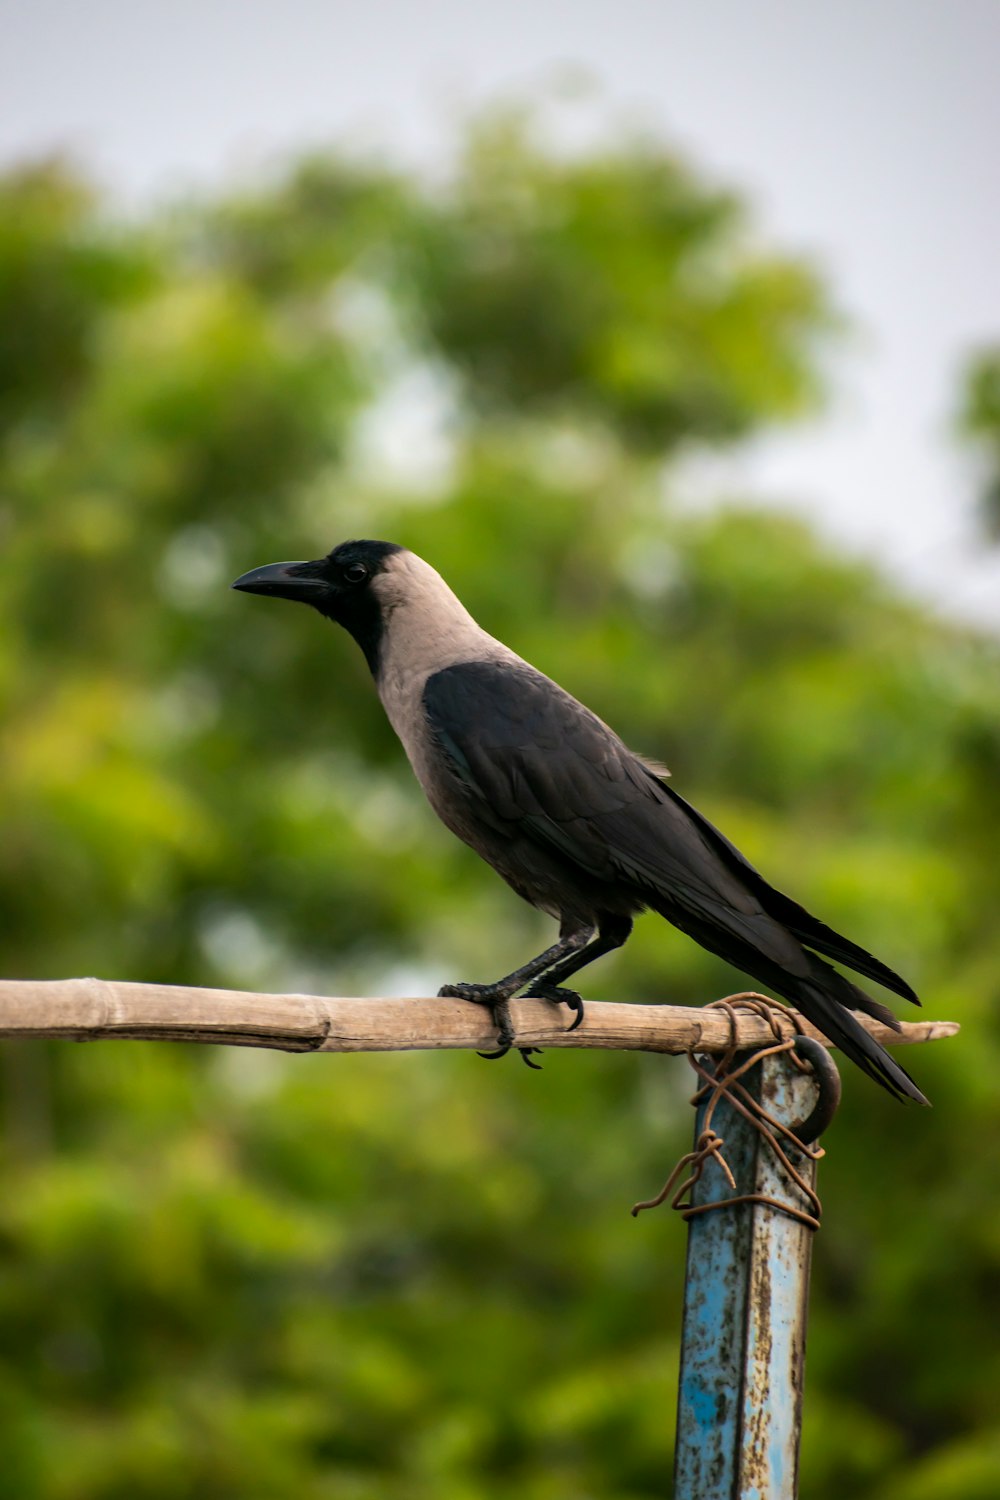 black and gray bird on brown tree branch during daytime